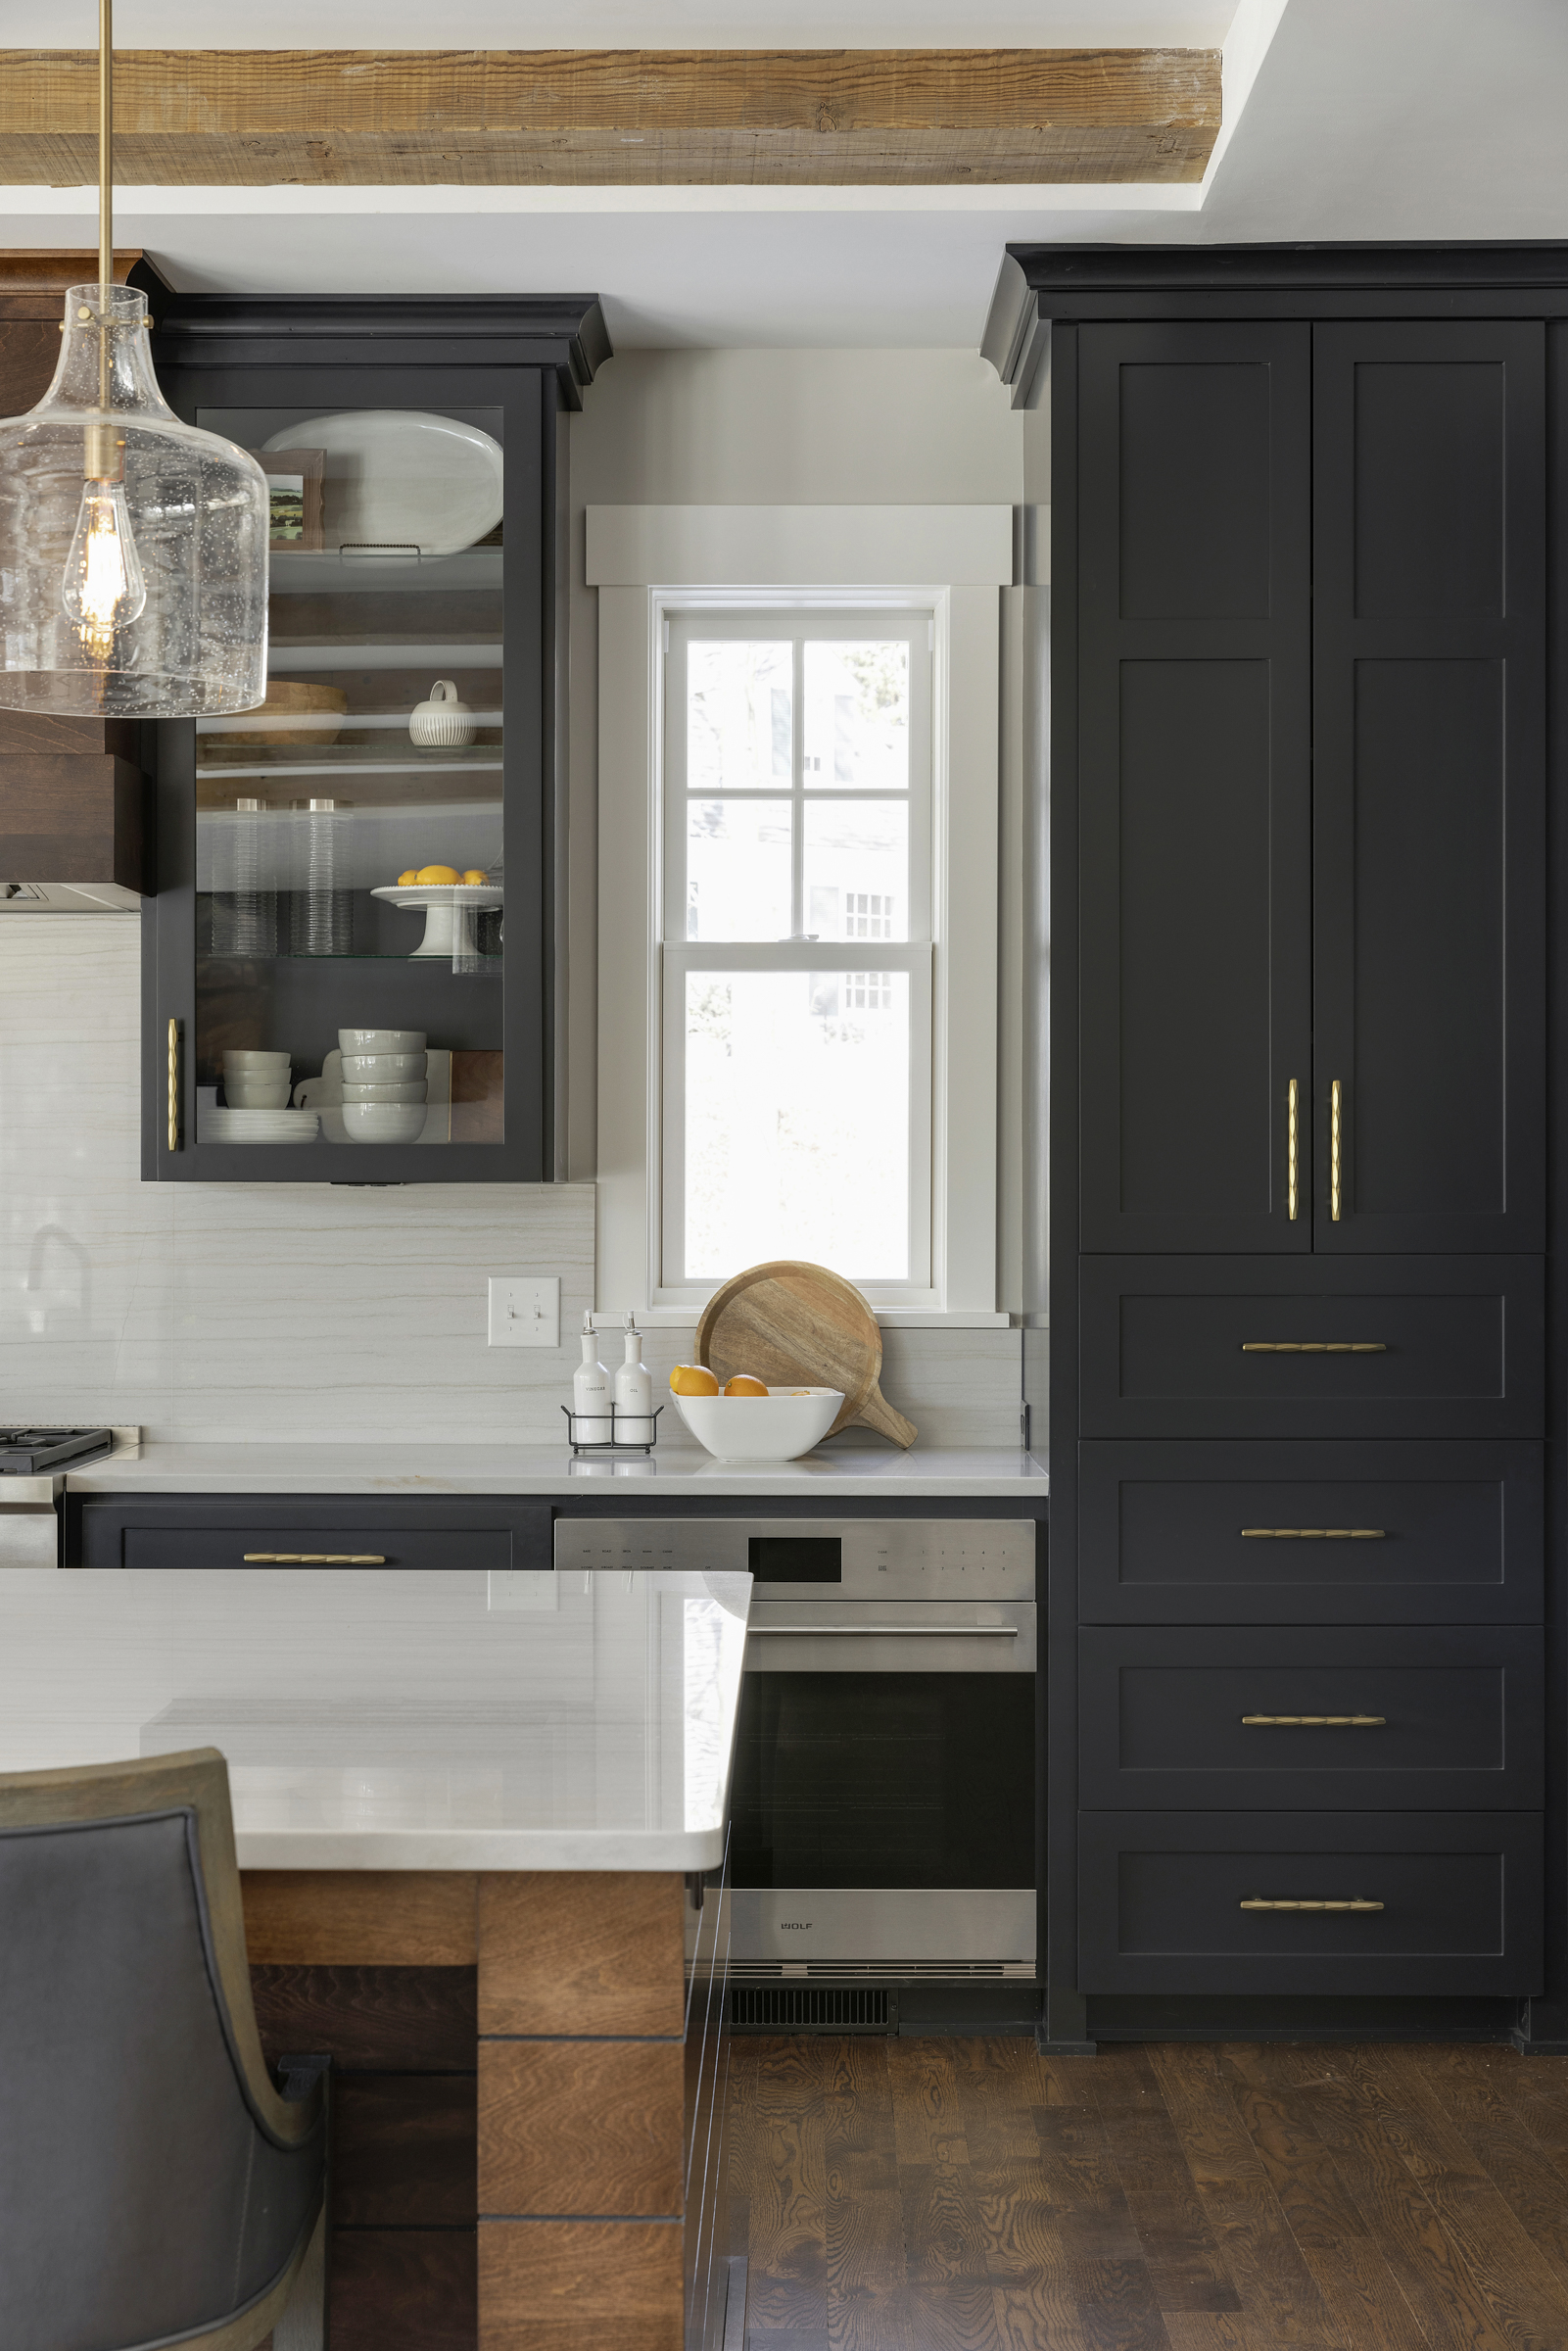 A kitchen with black cabinets and wood floors.